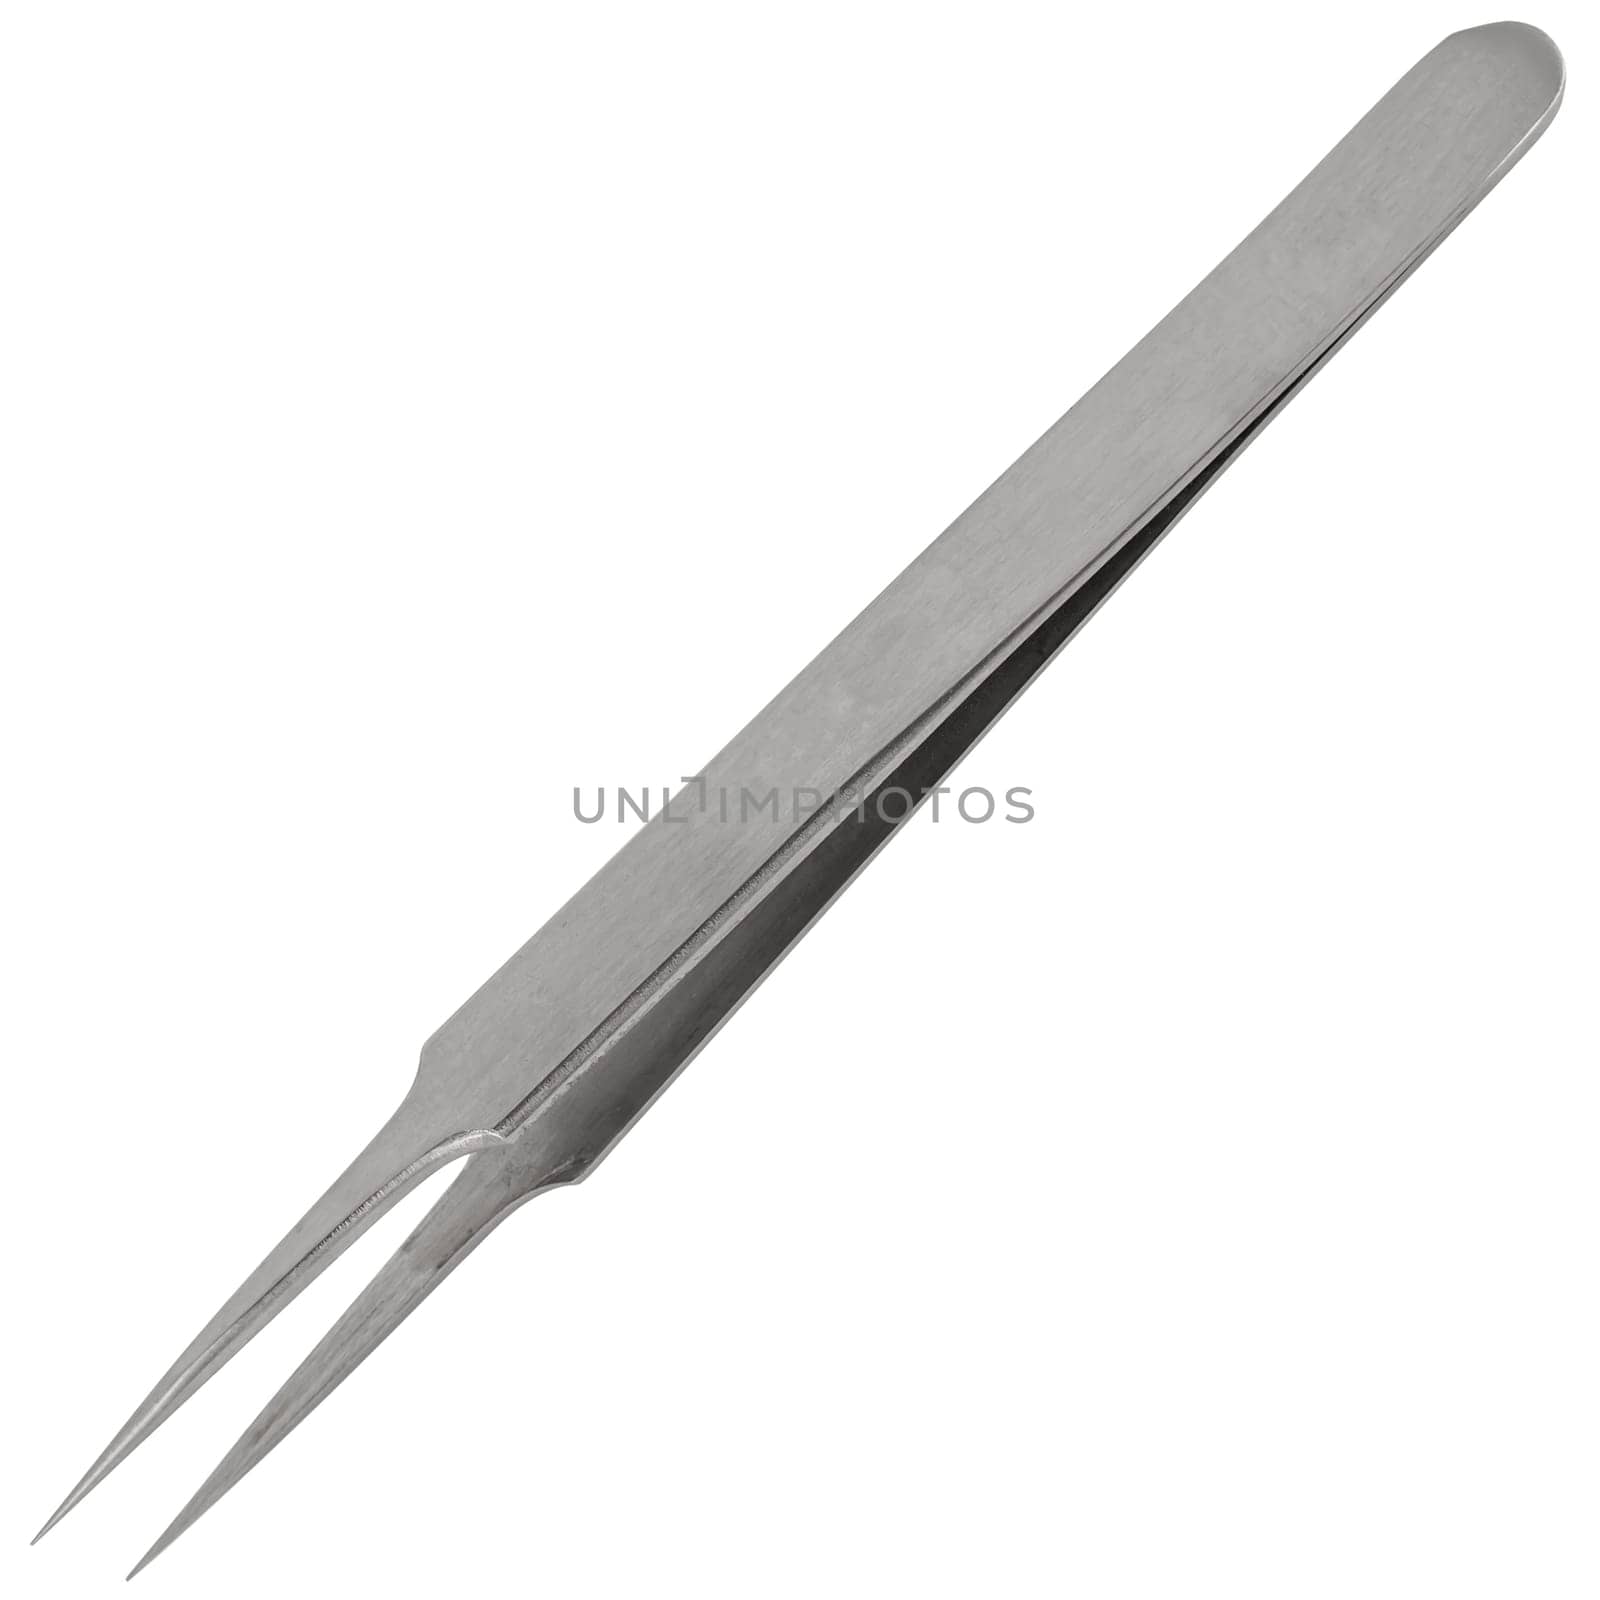 Tweezers, a tool for manipulating small objects, on white background by A_A